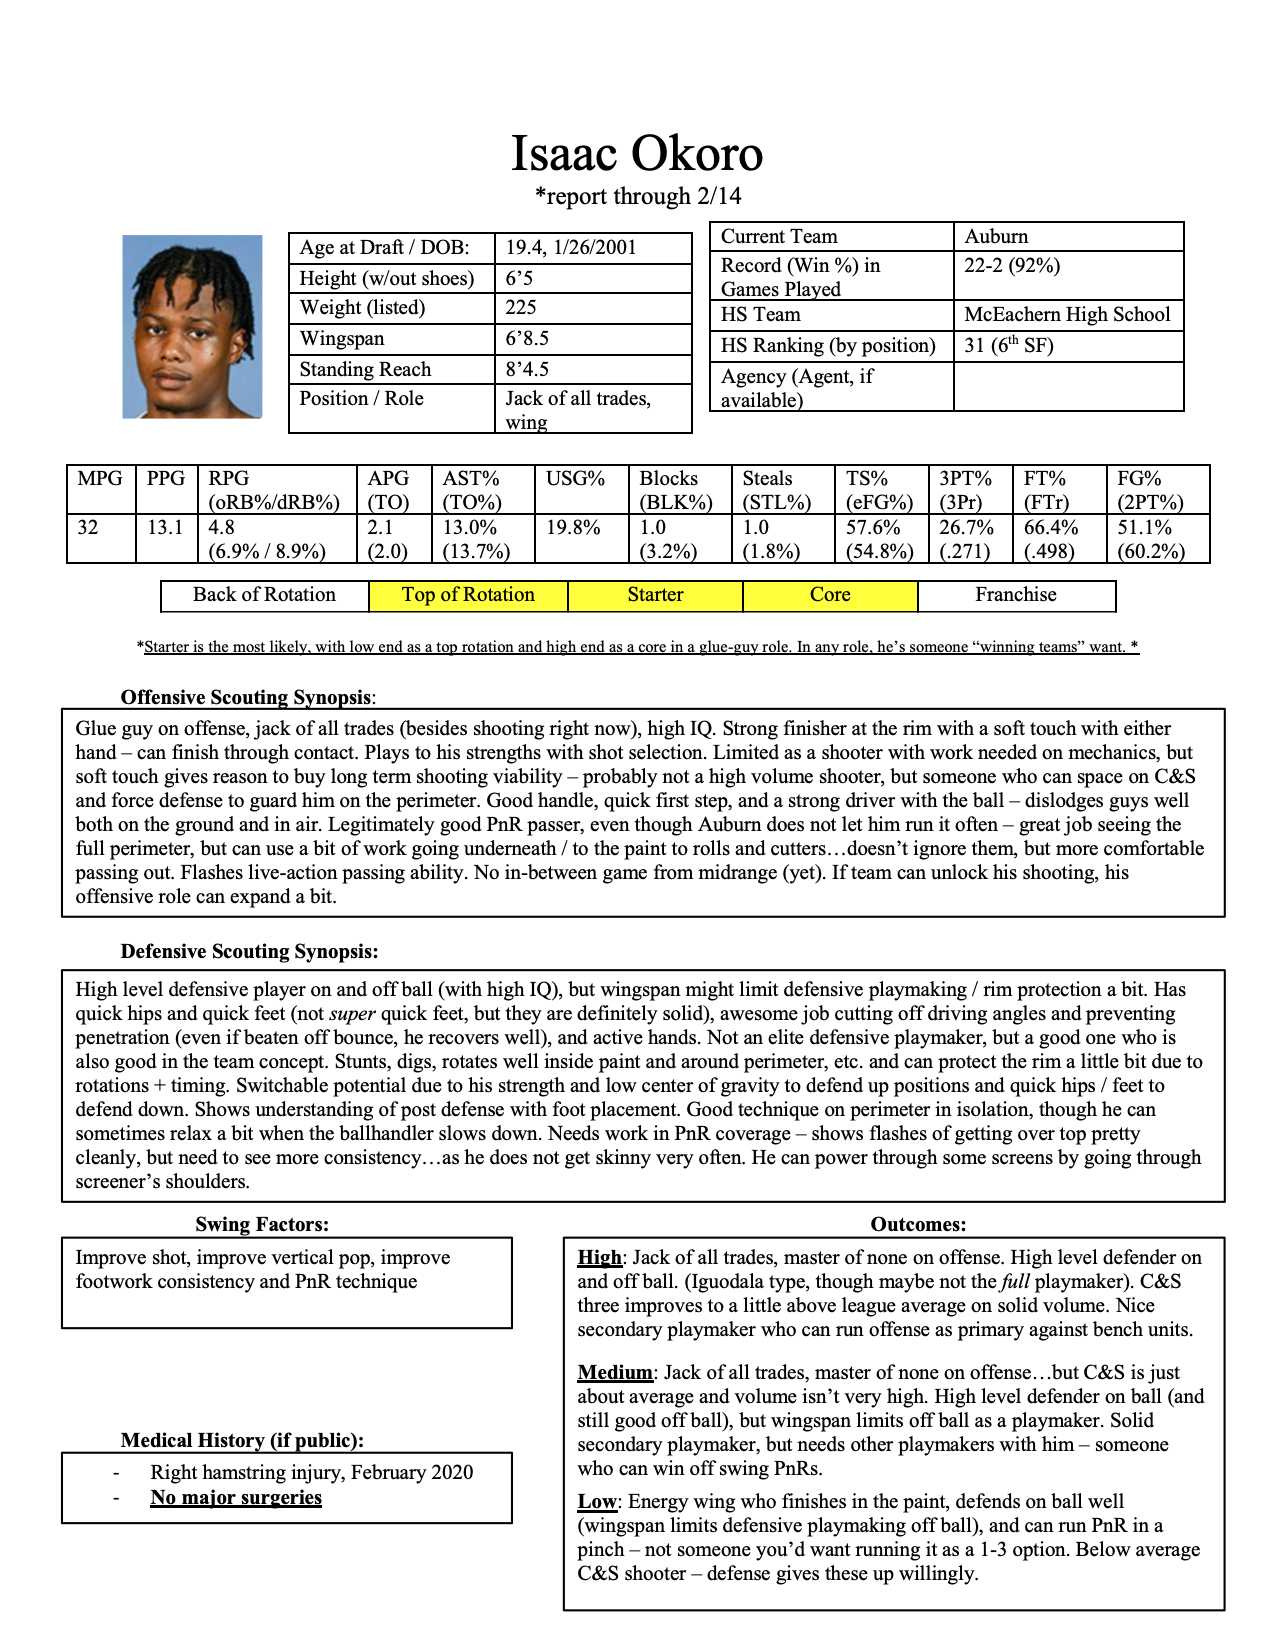 Isaac Okoro Scouting Report – The Stepien For Basketball Player Scouting Report Template